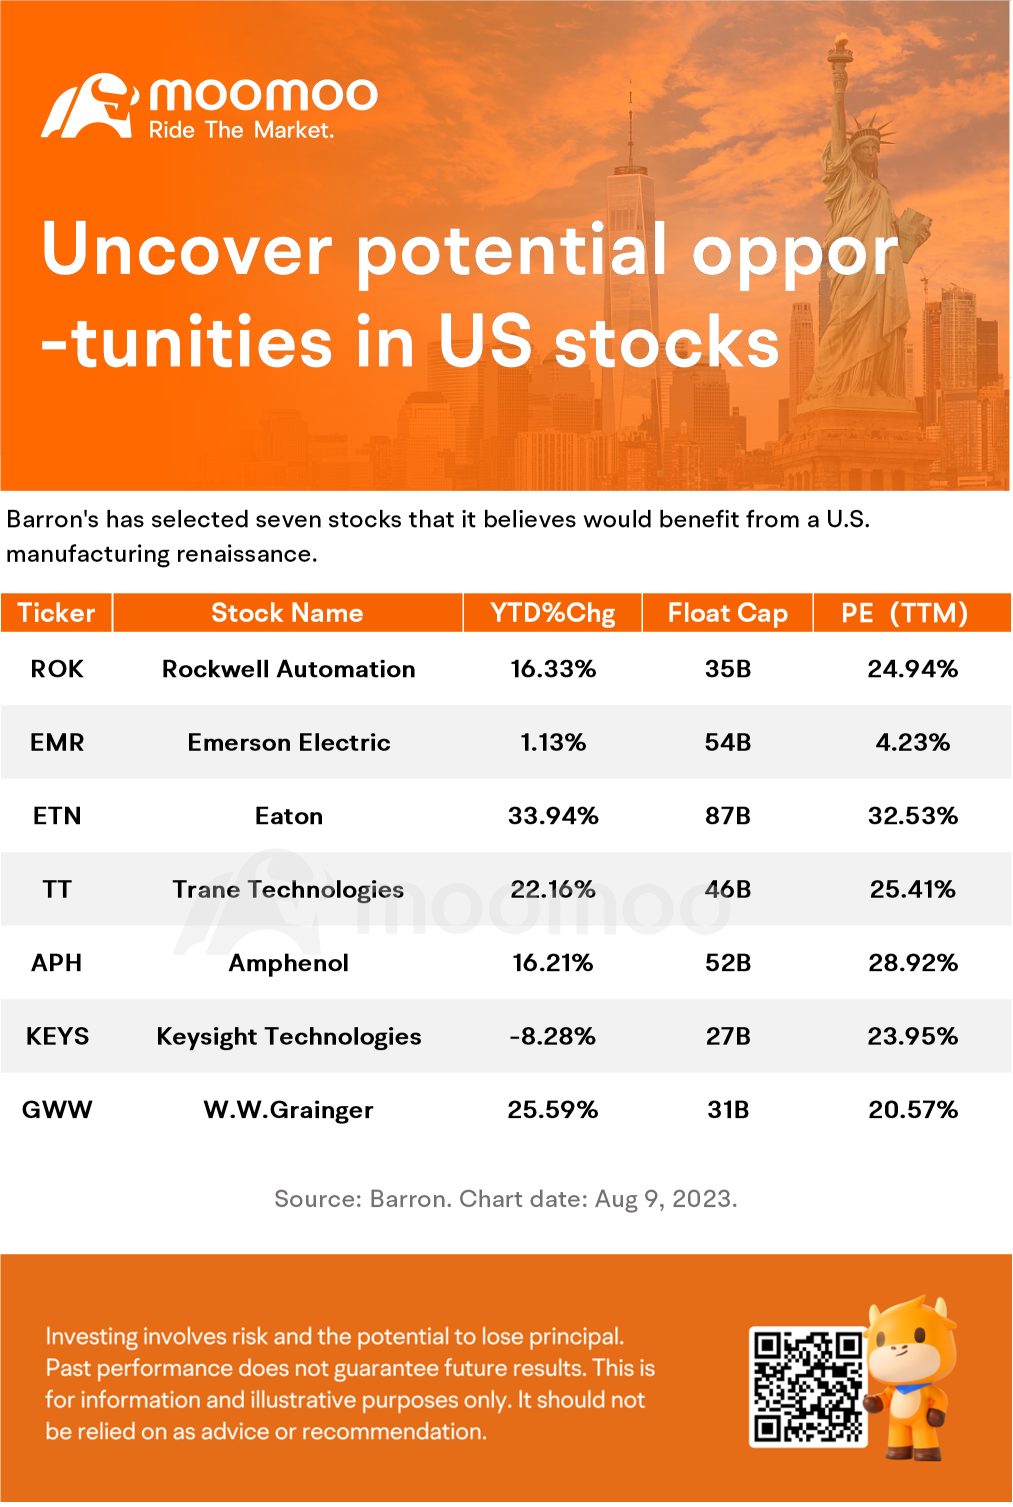 Going beyond tech: Uncover potential opportunities in US stocks